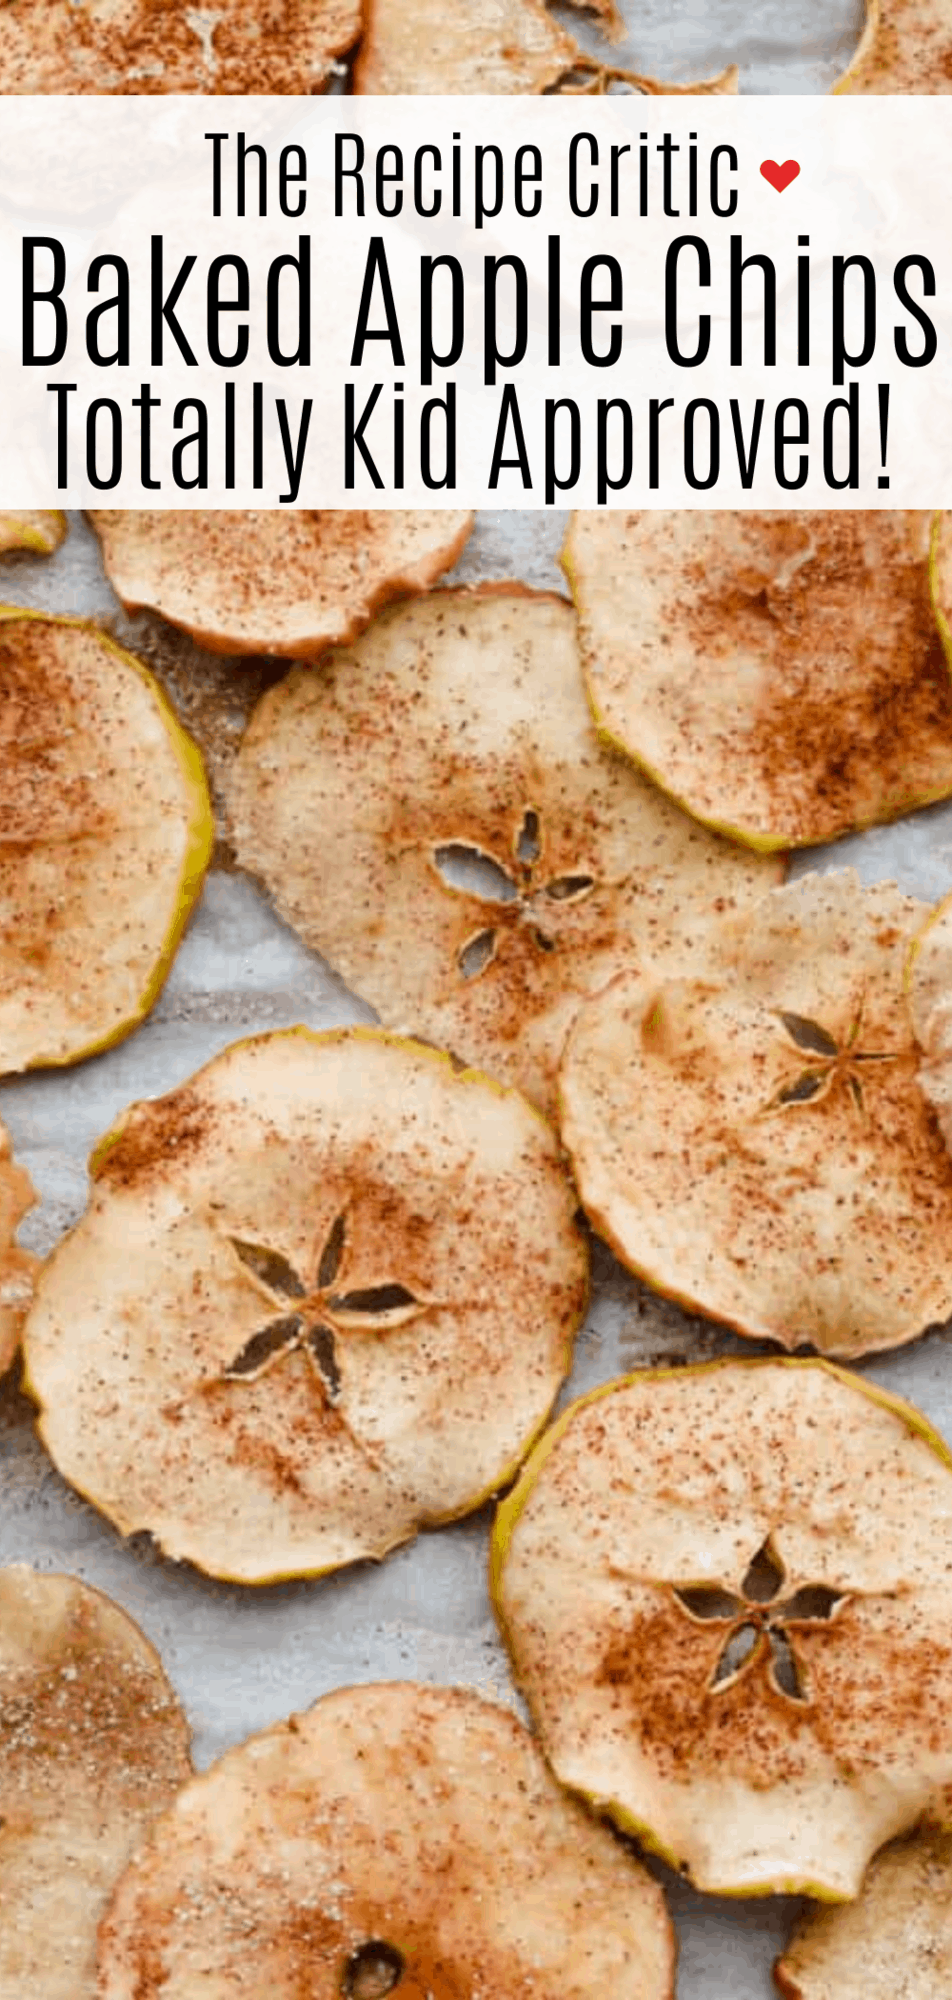 https://therecipecritic.com/wp-content/uploads/2015/08/Baked-Apple-Chips-1.png